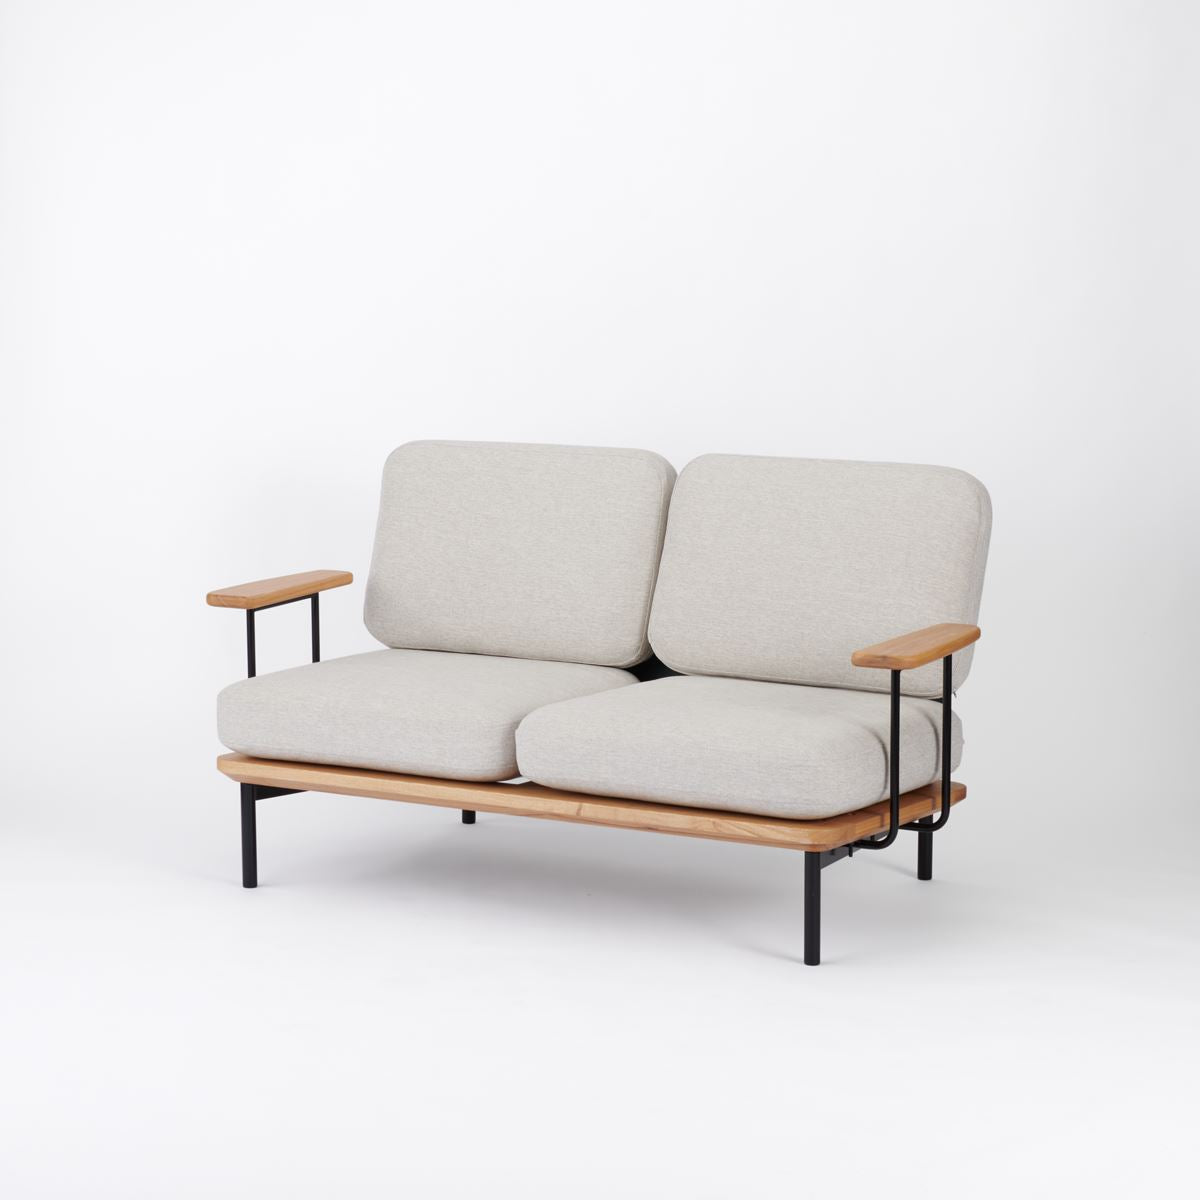 KUUM  Sofa 2 seater Double arm - Steel Frame/Natural / クーム ソファ